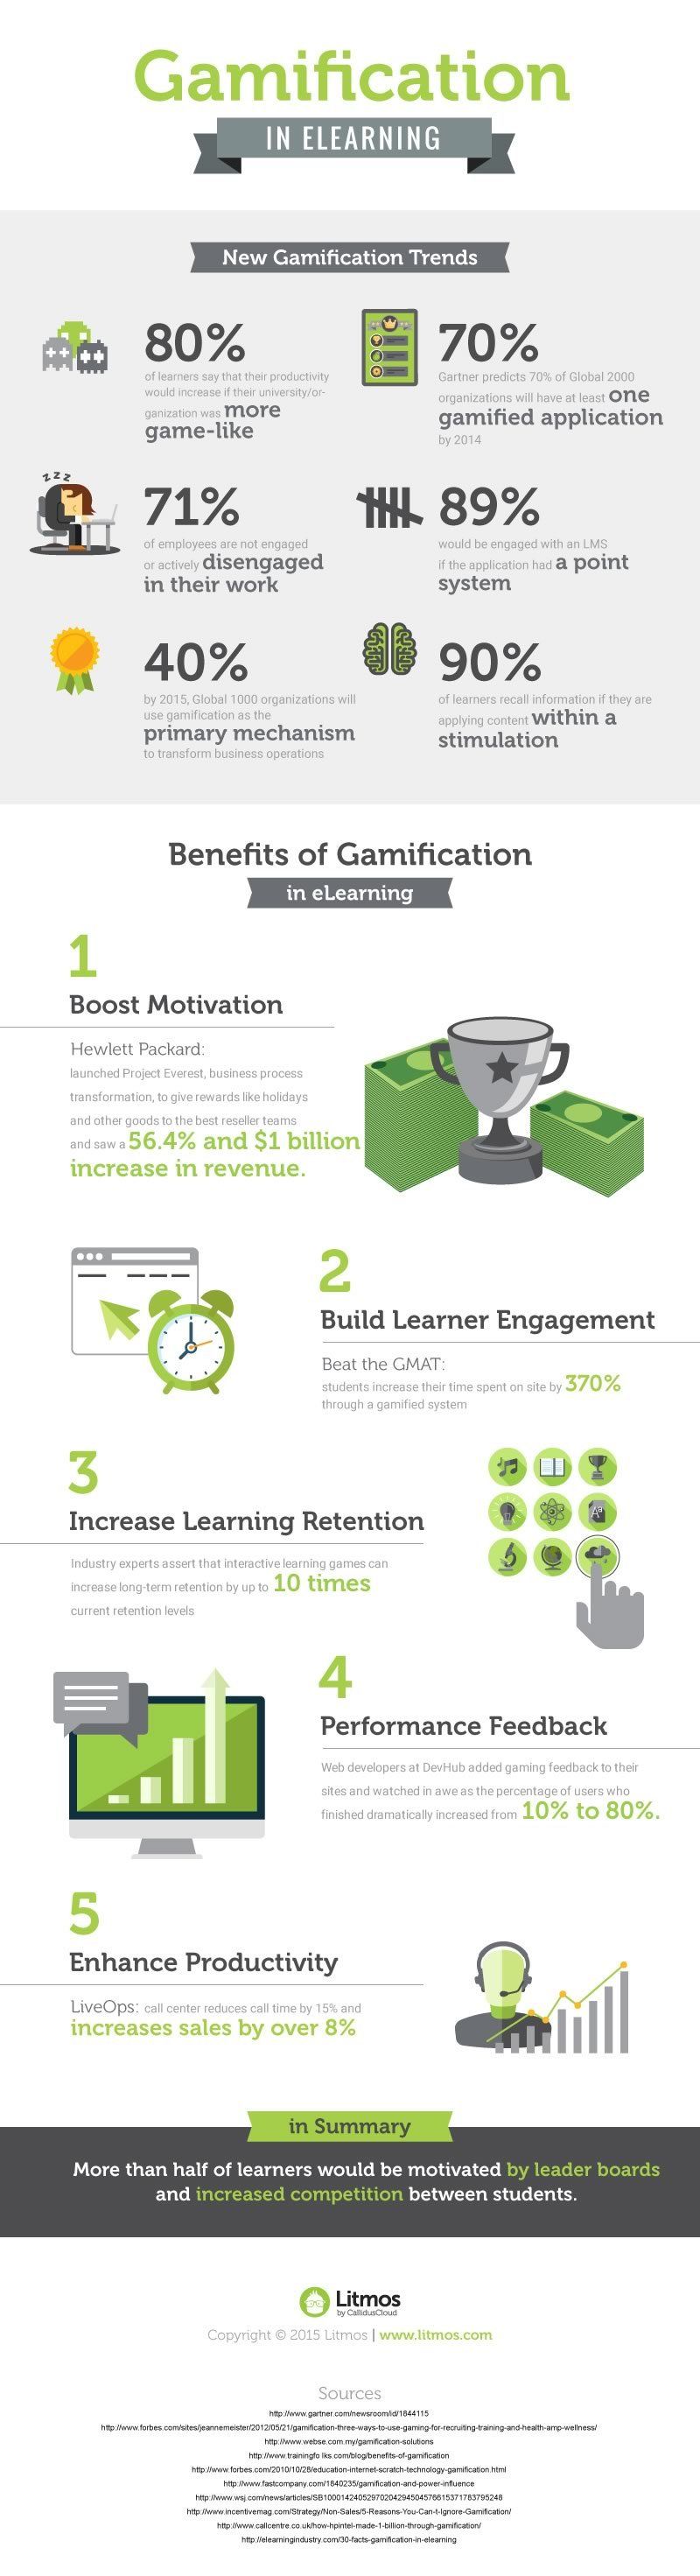 Gamification in eLearning Infographic